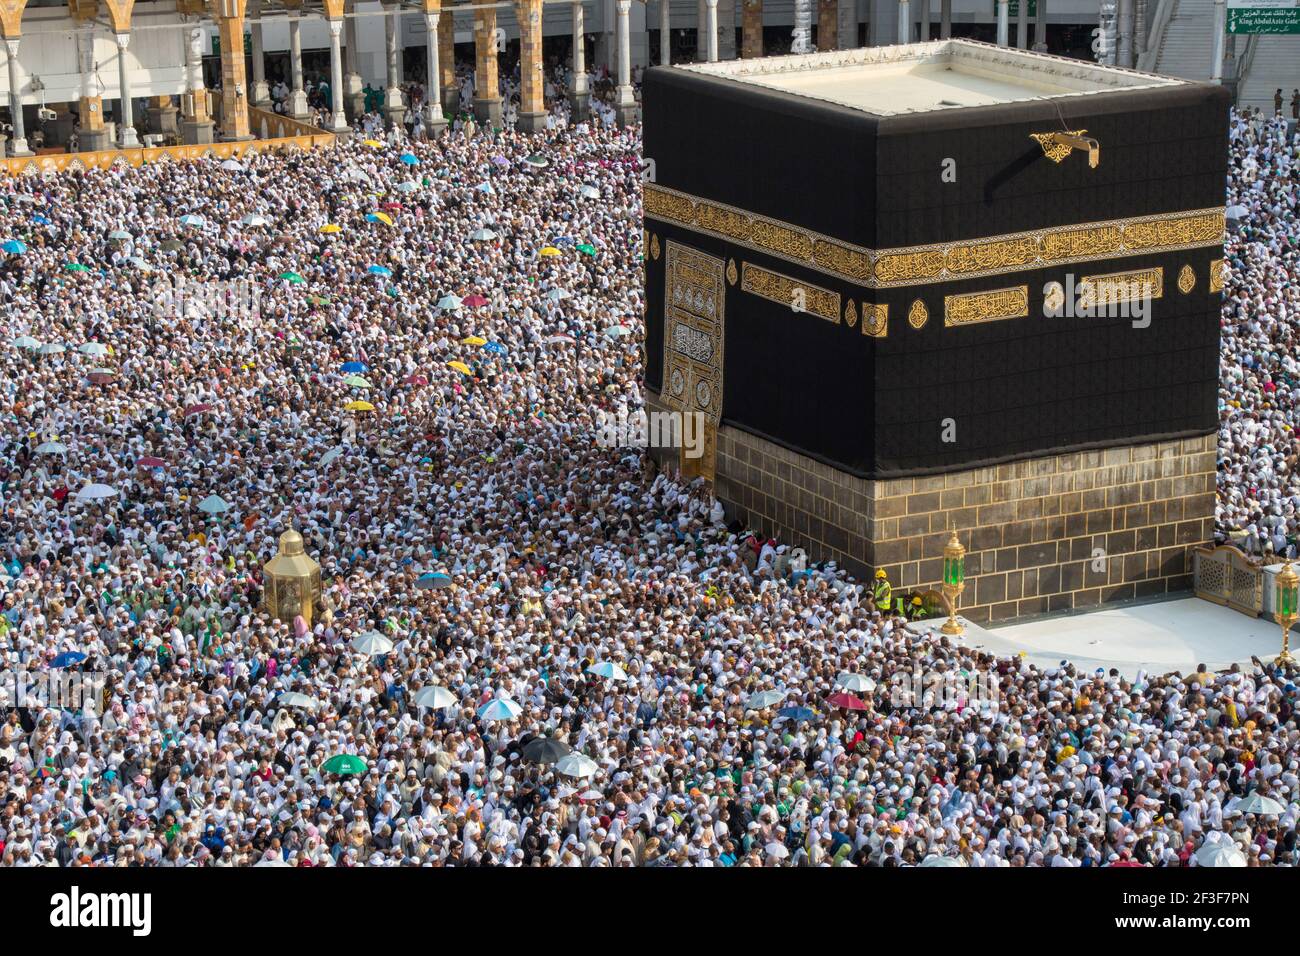 Muslim pilgrims revolving around the Kaaba in Mecca Saudi Arabia. Muslim people praying together at holy place. Stock Photo